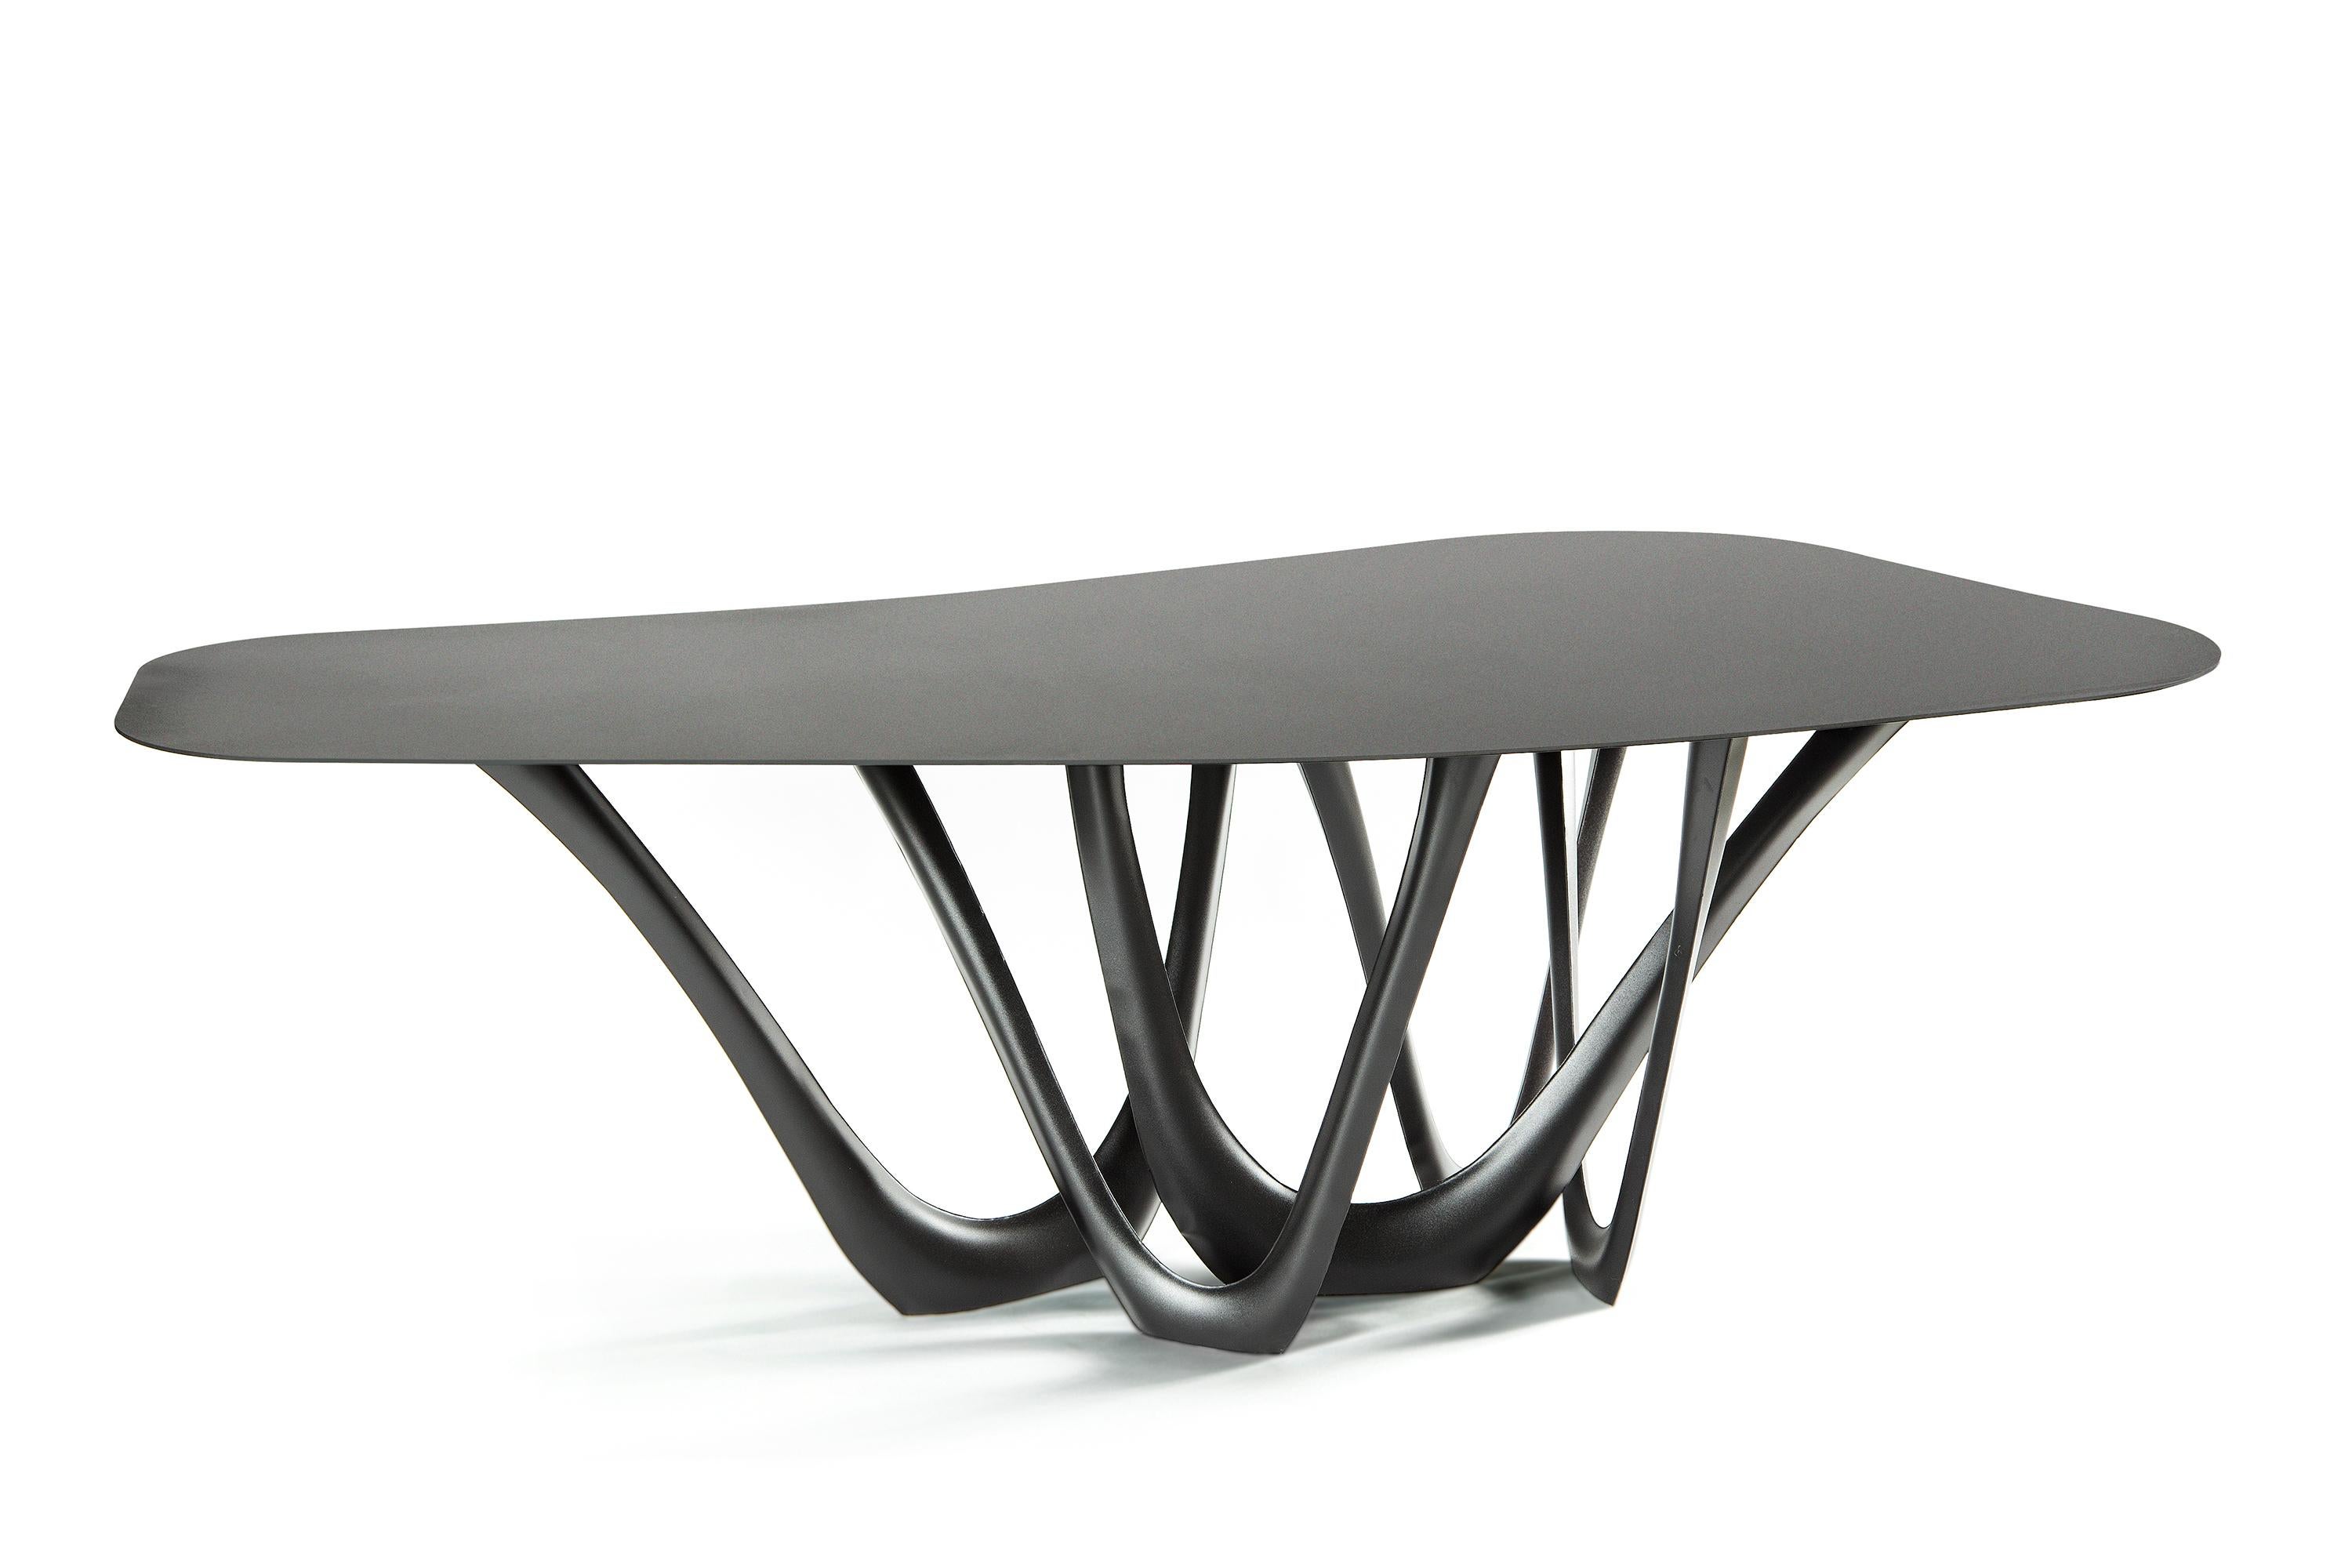 Powder-Coated Black Glossy Steel Sculptural G-Table by Zieta For Sale